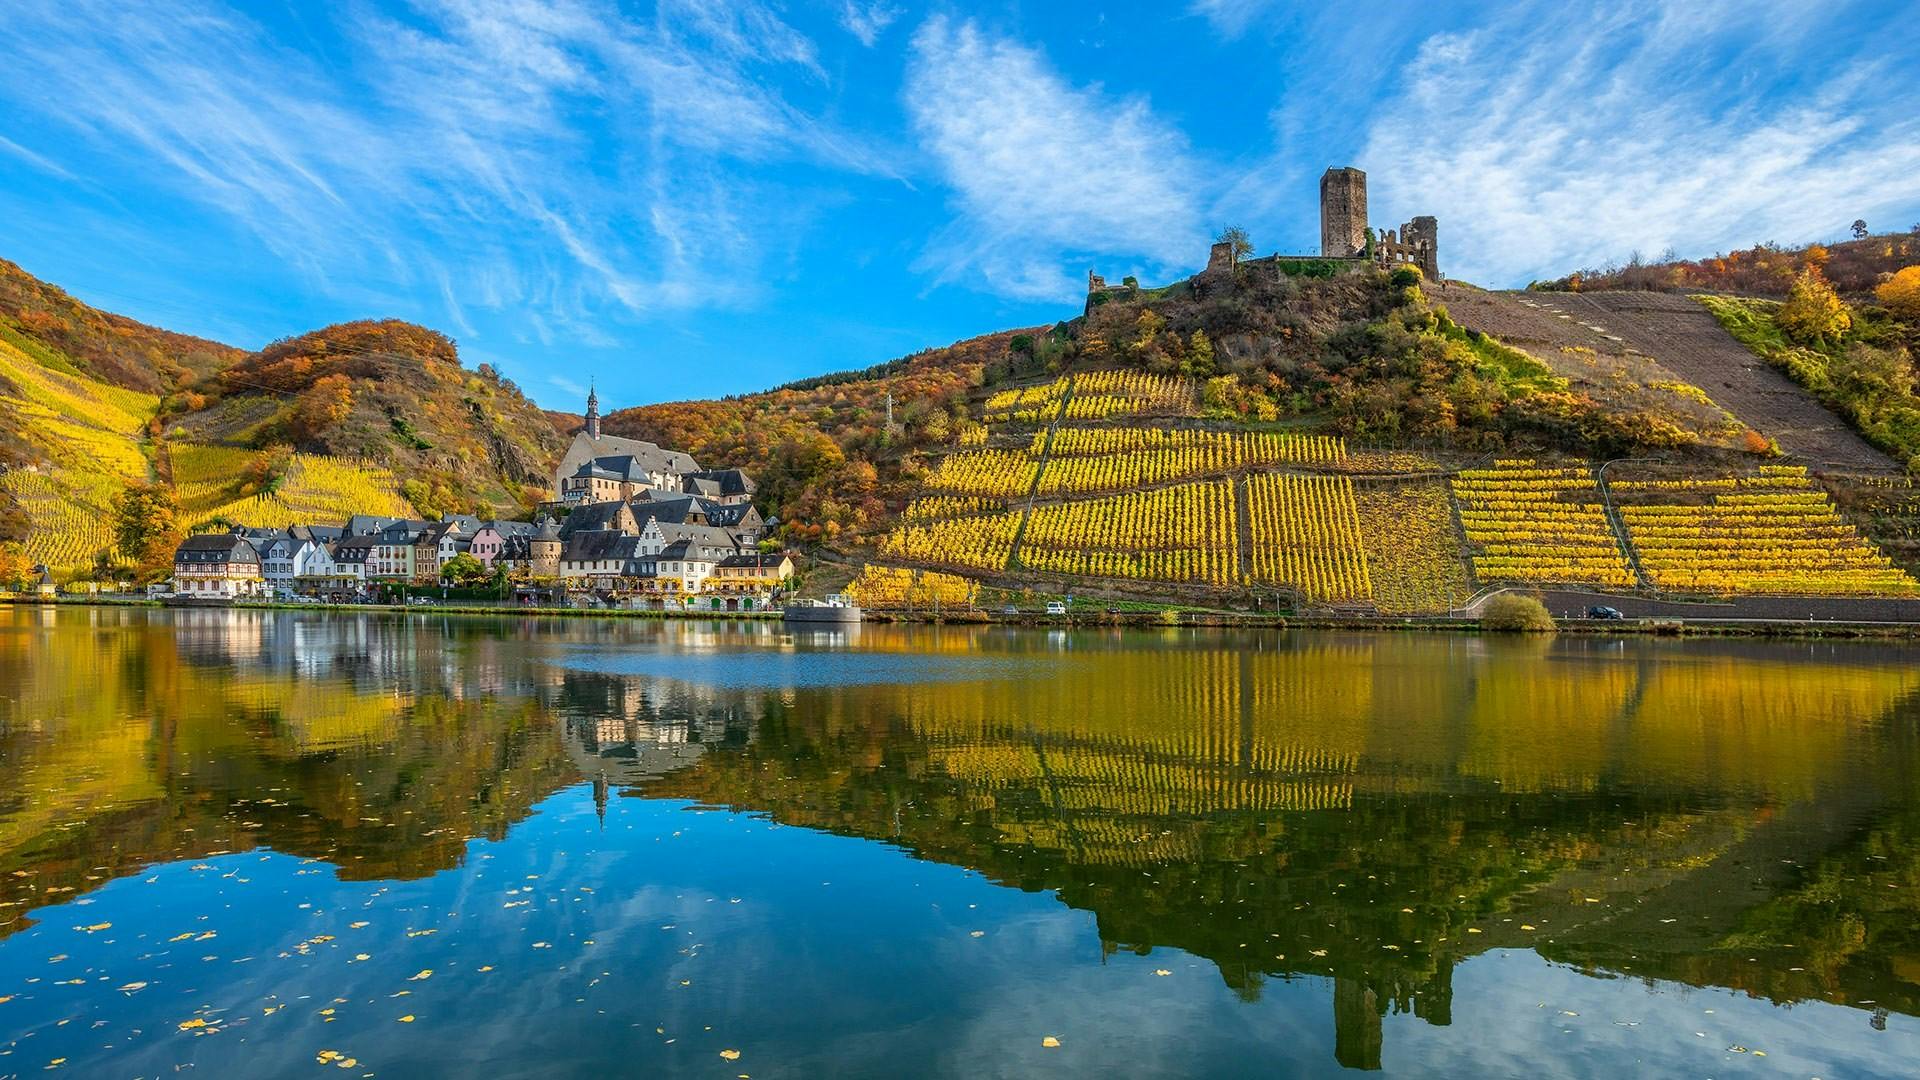 <p>Beilstein is a small town in the Cochem-Zell district of Rhineland-Palatinate, Germany. It is located on the Moselle River, about 15 minutes drive from Cochem. It is known as the <em>Sleeping Beauty of the Moselle</em> because of its picturesque setting and historic buildings. </p><p><br></p><p><u>Here is some extensive information about Beilstein</u></p><p><br></p><p><strong>History</strong></p><p>Beilstein was first settled around AD 800 by the Franks. In 1309, it was granted town privileges and fortified by the Lords of Braunshorn. It also had a Jewish community and a cemetery, which still exists today. In 1360, the town passed to the Lords of Winneburg, who were later enfeoffed by the Electorate of Trier with the Lordship of Winneburg and Beilstein. </p><p><br></p><p>In 1488, the town became part of the Electorate of Trier. In 1636, a Carmelite monastery was founded, which was dissolved in 1803. In 1689, the town and the castle Metternich were destroyed by French troops. In 1794, the town was occupied by the French Revolutionaries, and in 1815, it was assigned to Prussia. Since 1946, it has been part of the state of Rhineland-Palatinate.</p><p><br></p><p><strong>Attractions</strong></p><p><u>Beilstein has many historic and cultural attractions, such as</u></p><p><br></p><p>The castle Metternich, which was built in the 13th century and offers a panoramic view of the town and the river. It is also a venue for cultural events and concerts.</p><p><br></p><p>The Carmelite monastery church, which was built between 1691 and 1783 in the Baroque style. It has a rich interior with paintings, sculptures, and an organ. It is also a pilgrimage site for the Black Madonna of Beilstein, a wooden statue from the 12th century.</p><p><br></p><p>The former parish church of St. Joseph, which was built in 1310 and renovated in the 18th century. It has a Gothic choir, a Baroque altar, and a Rococo pulpit.</p><p><br></p><p>The historic town center, which has many well-preserved half-timbered houses, narrow alleys, and fountains. It also has several restaurants, cafes, and wine taverns that offer local specialties and wines.</p><p><br></p><p><strong>Wine</strong></p><p>Beilstein is part of the Moselle wine region, which is one of the oldest and most prestigious wine regions in Germany. The town has several wineries that produce high-quality wines from the Riesling, Müller-Thurgau, and Elbling grape varieties. The town also hosts wine festivals and events, such as the Beilstein Wine Festival in July and the Beilstein Wine Days in September.</p><p><br></p>